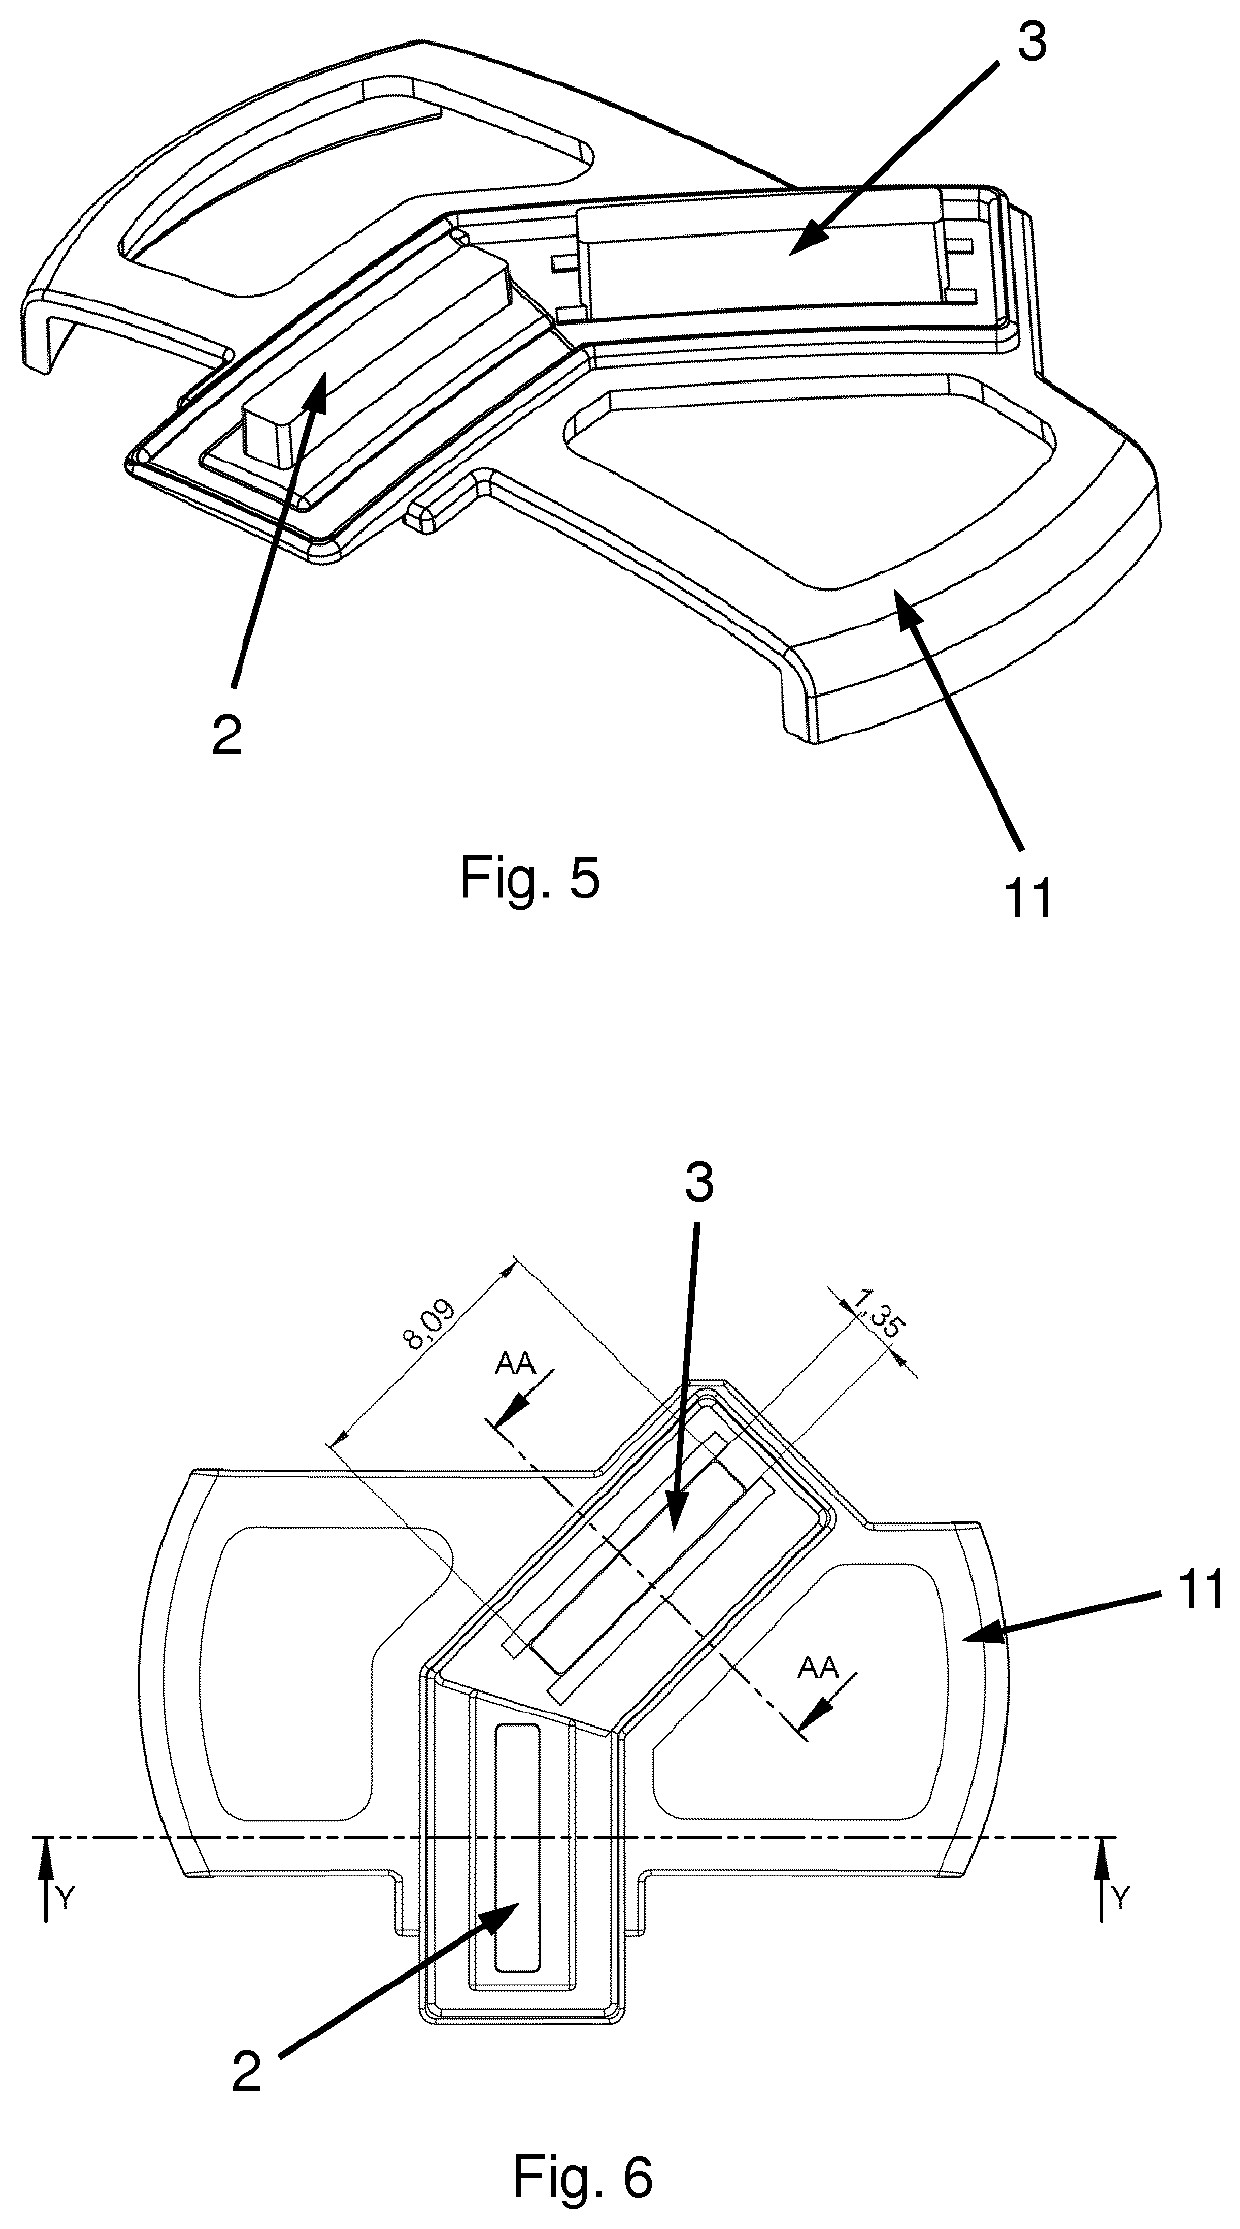 Device for measuring light exposure of a subject